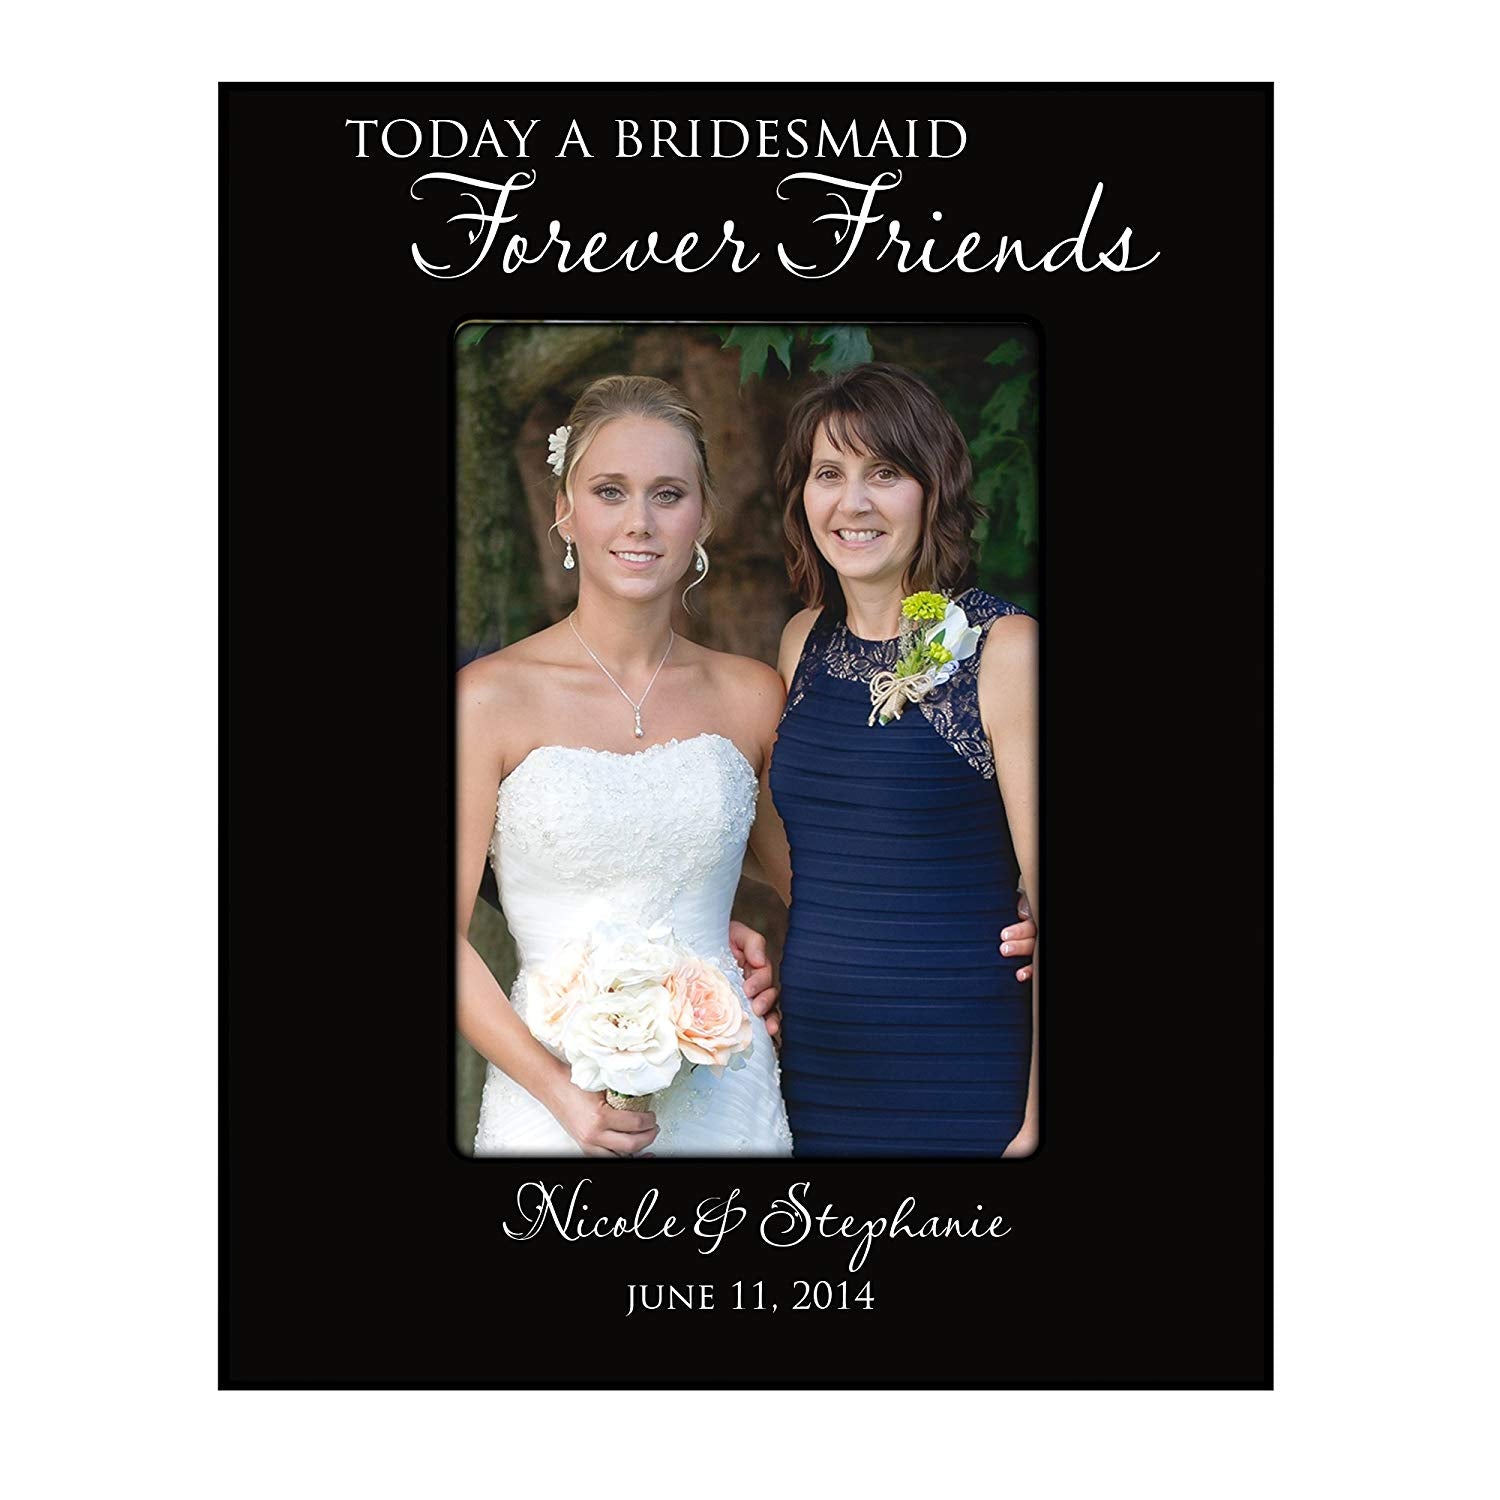 Bridesmaid picture frame Wedding Party Gifts Personalized - LifeSong Milestones